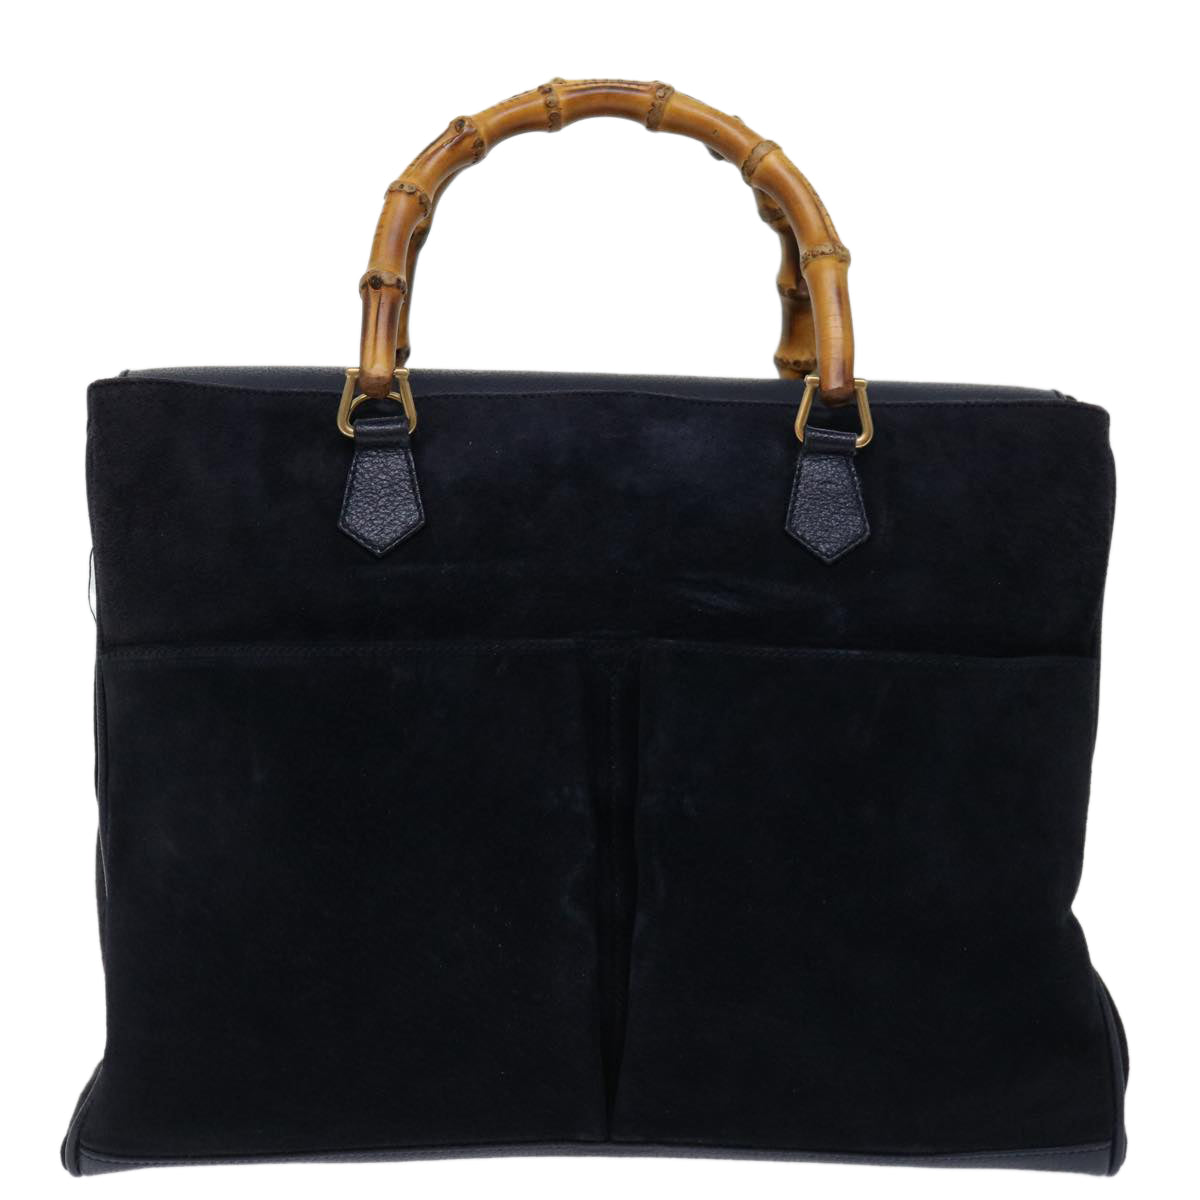 Gucci Bamboo Black Suede Tote Bag ()